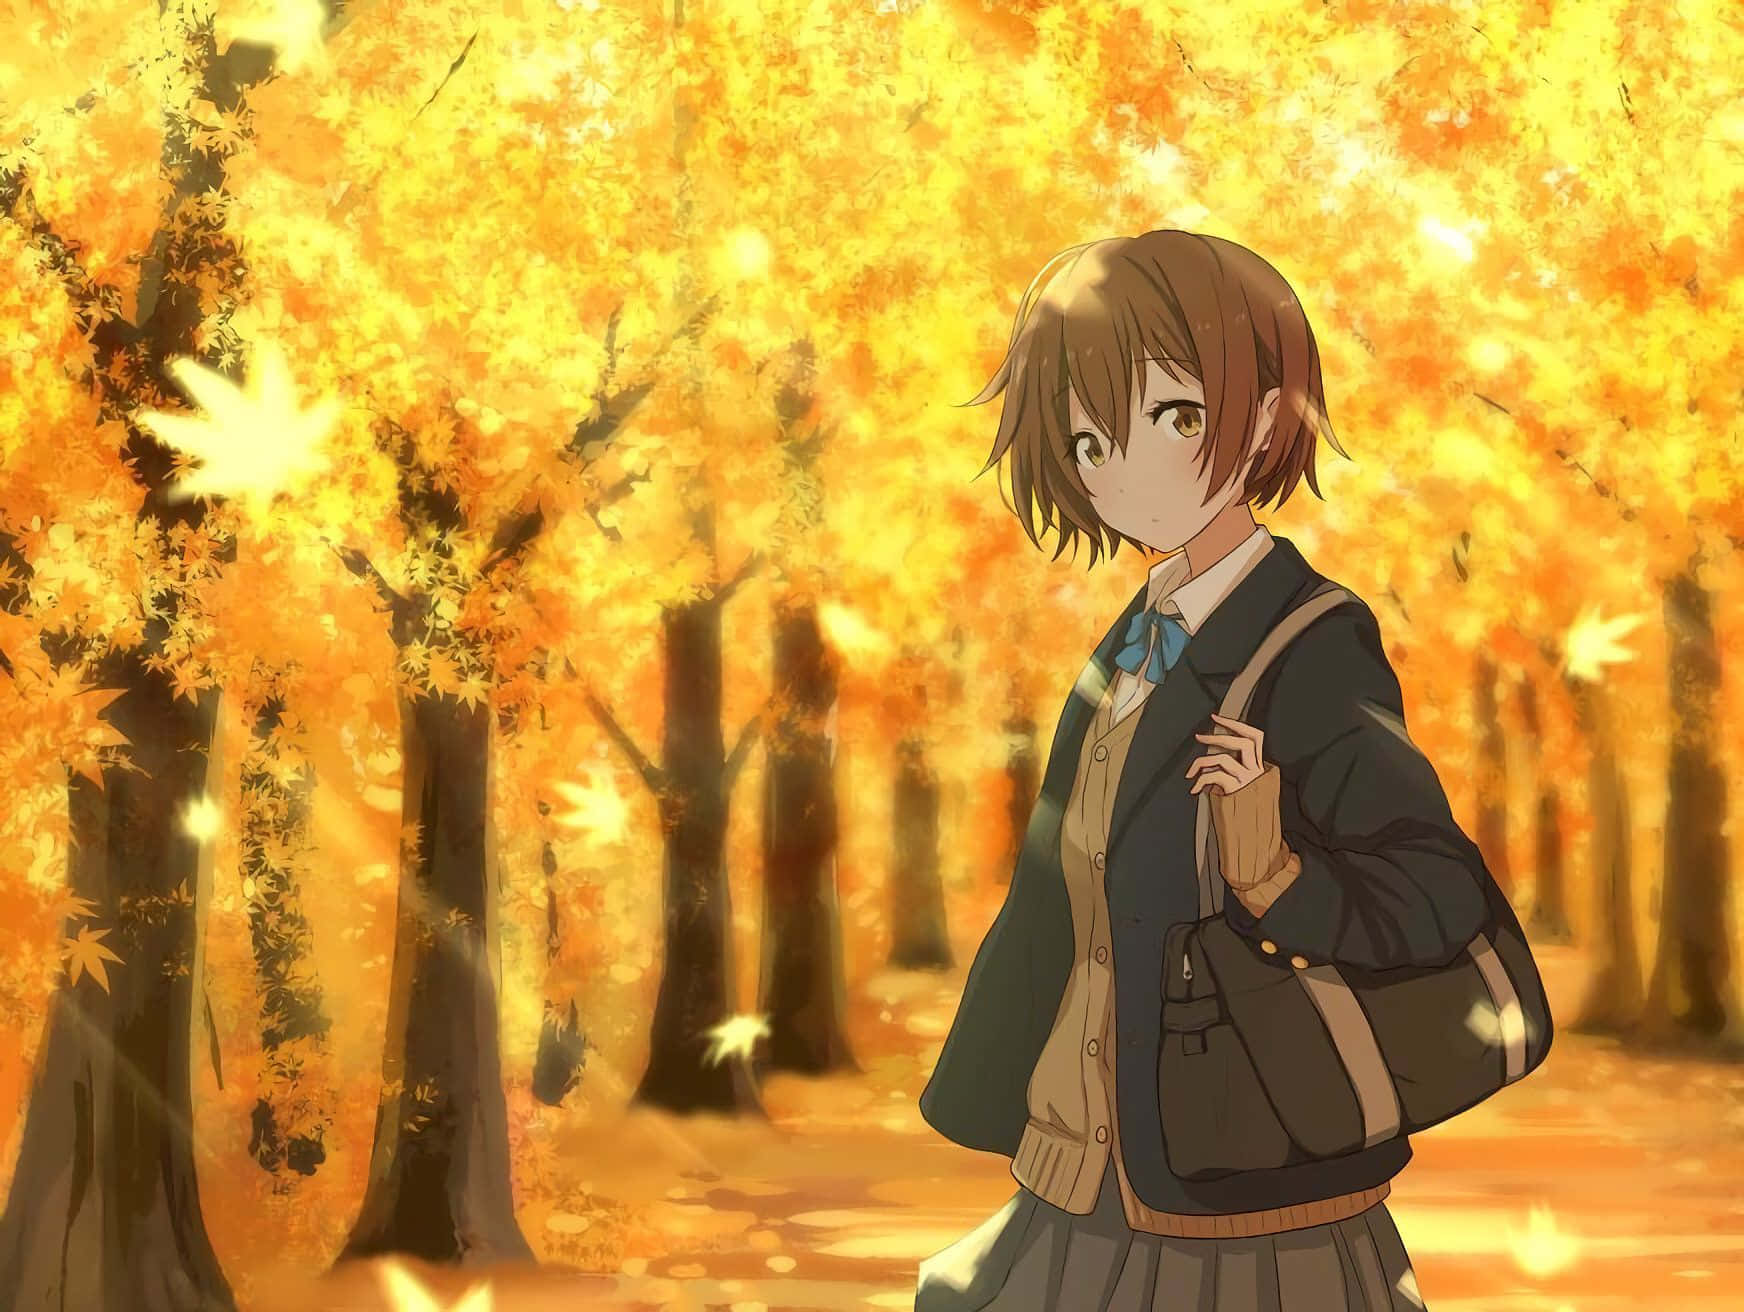 Yellow Fall Anime Girl In Forest Wallpaper